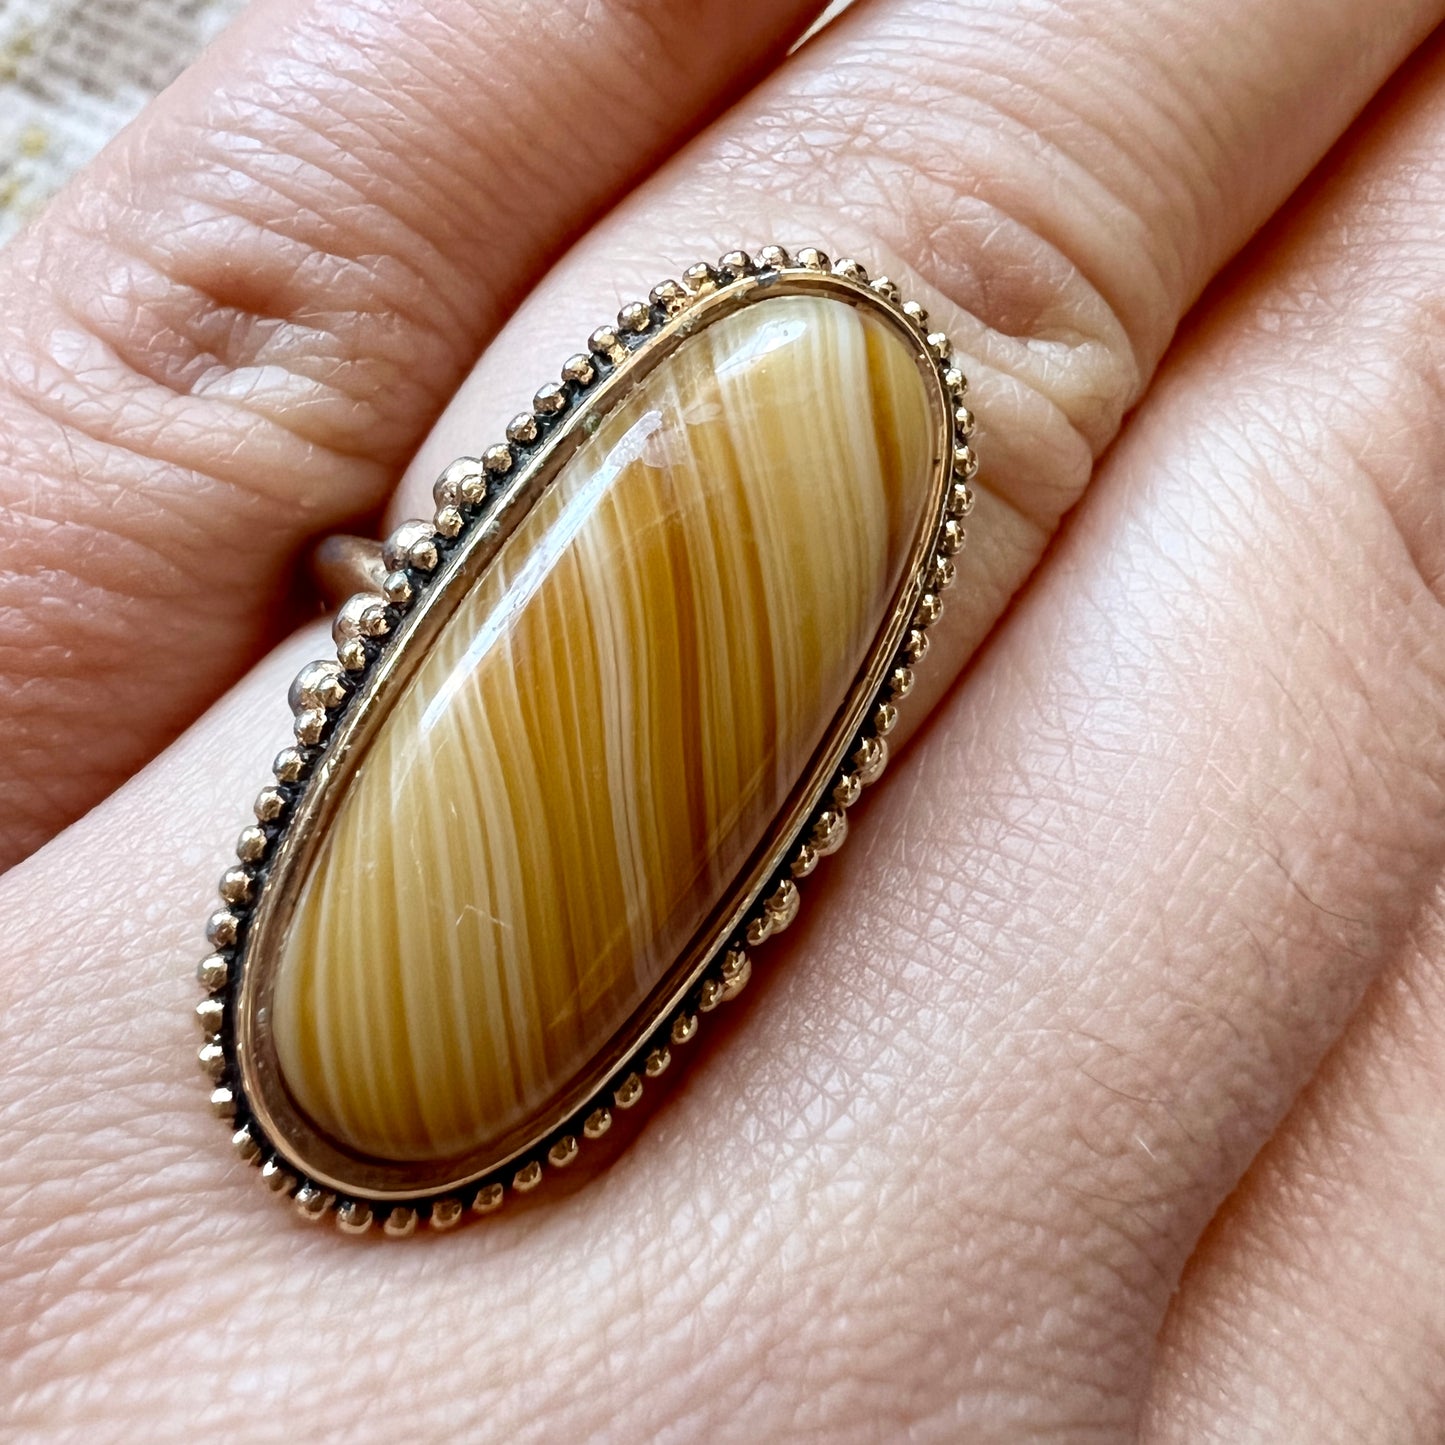 [AS-IS] 1970s AVON Cabochon Ring | size 5-6.25